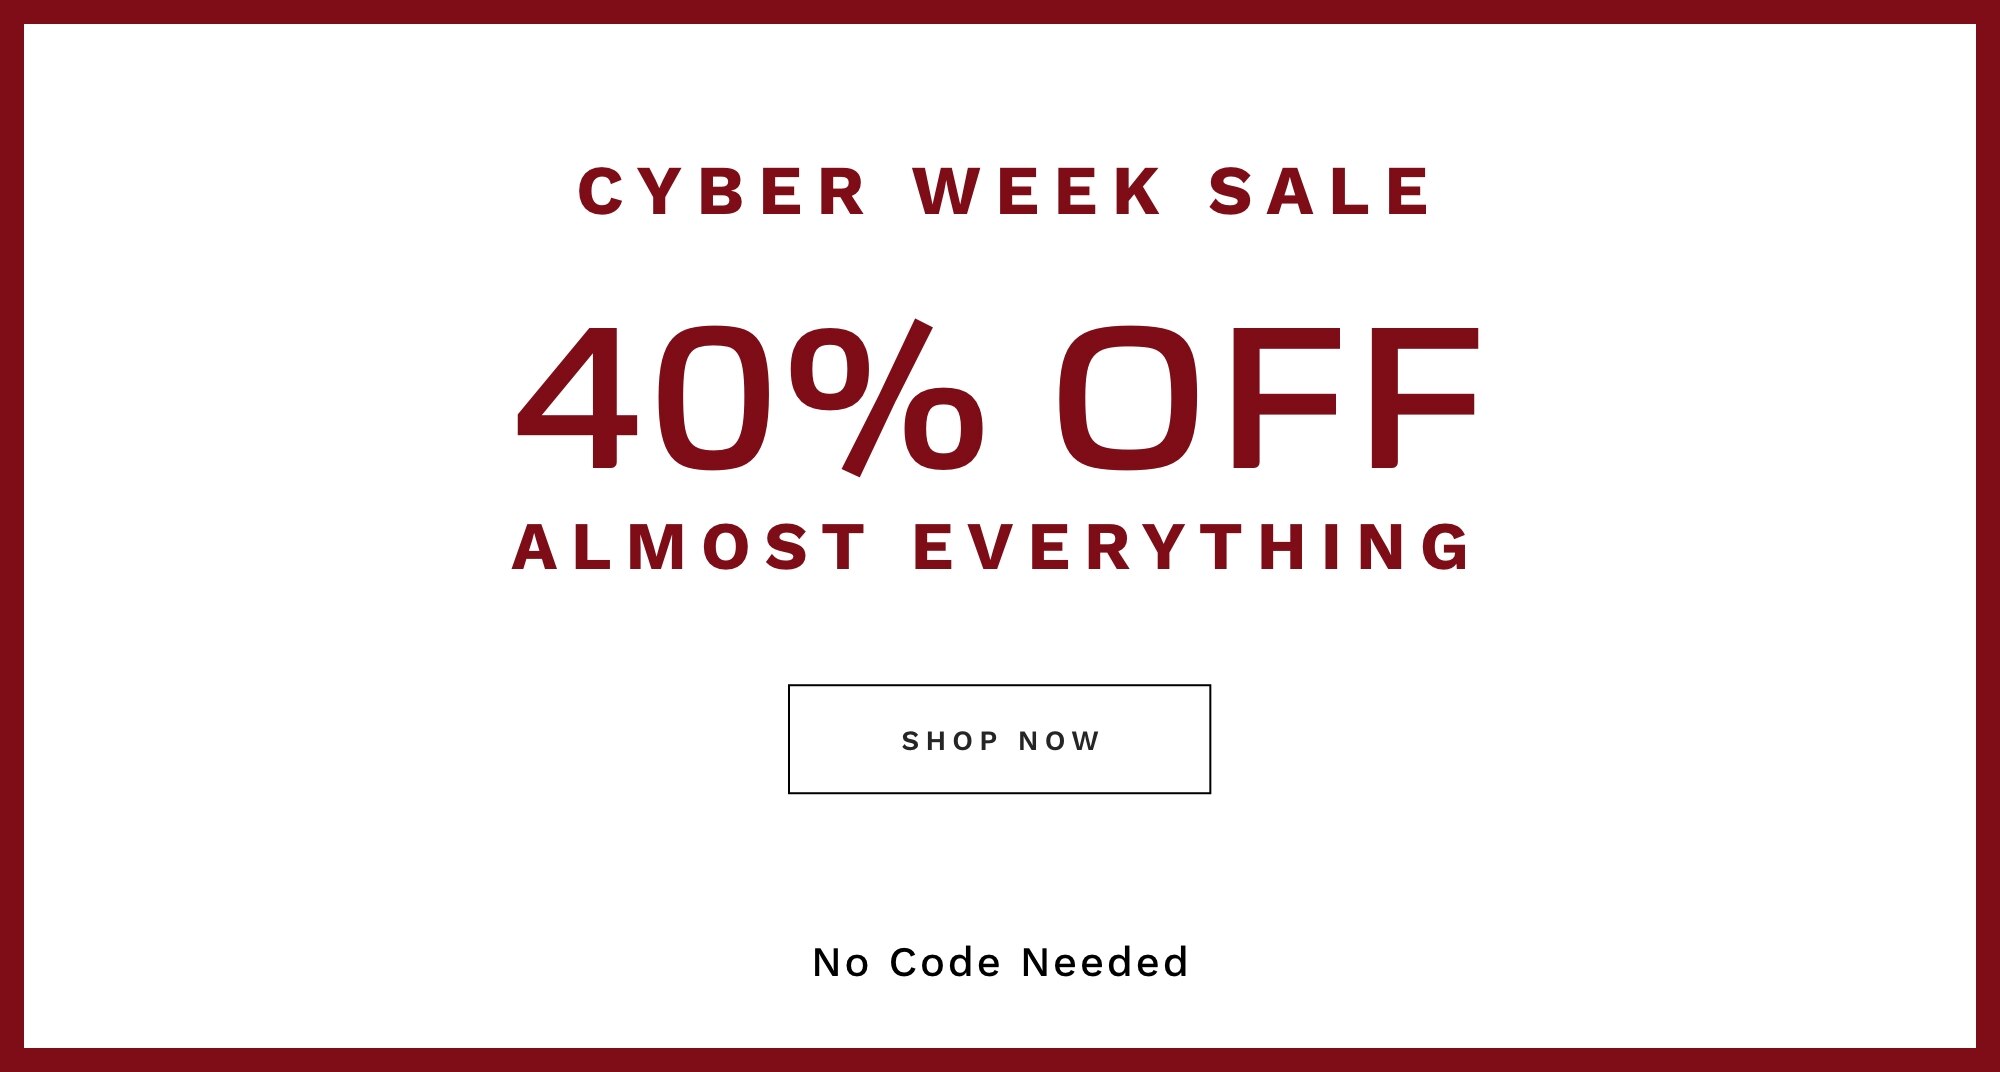 CYBER WEEK SALE 40% OFF ALMOST EVERYTHING SHOP NOW No Code Needed